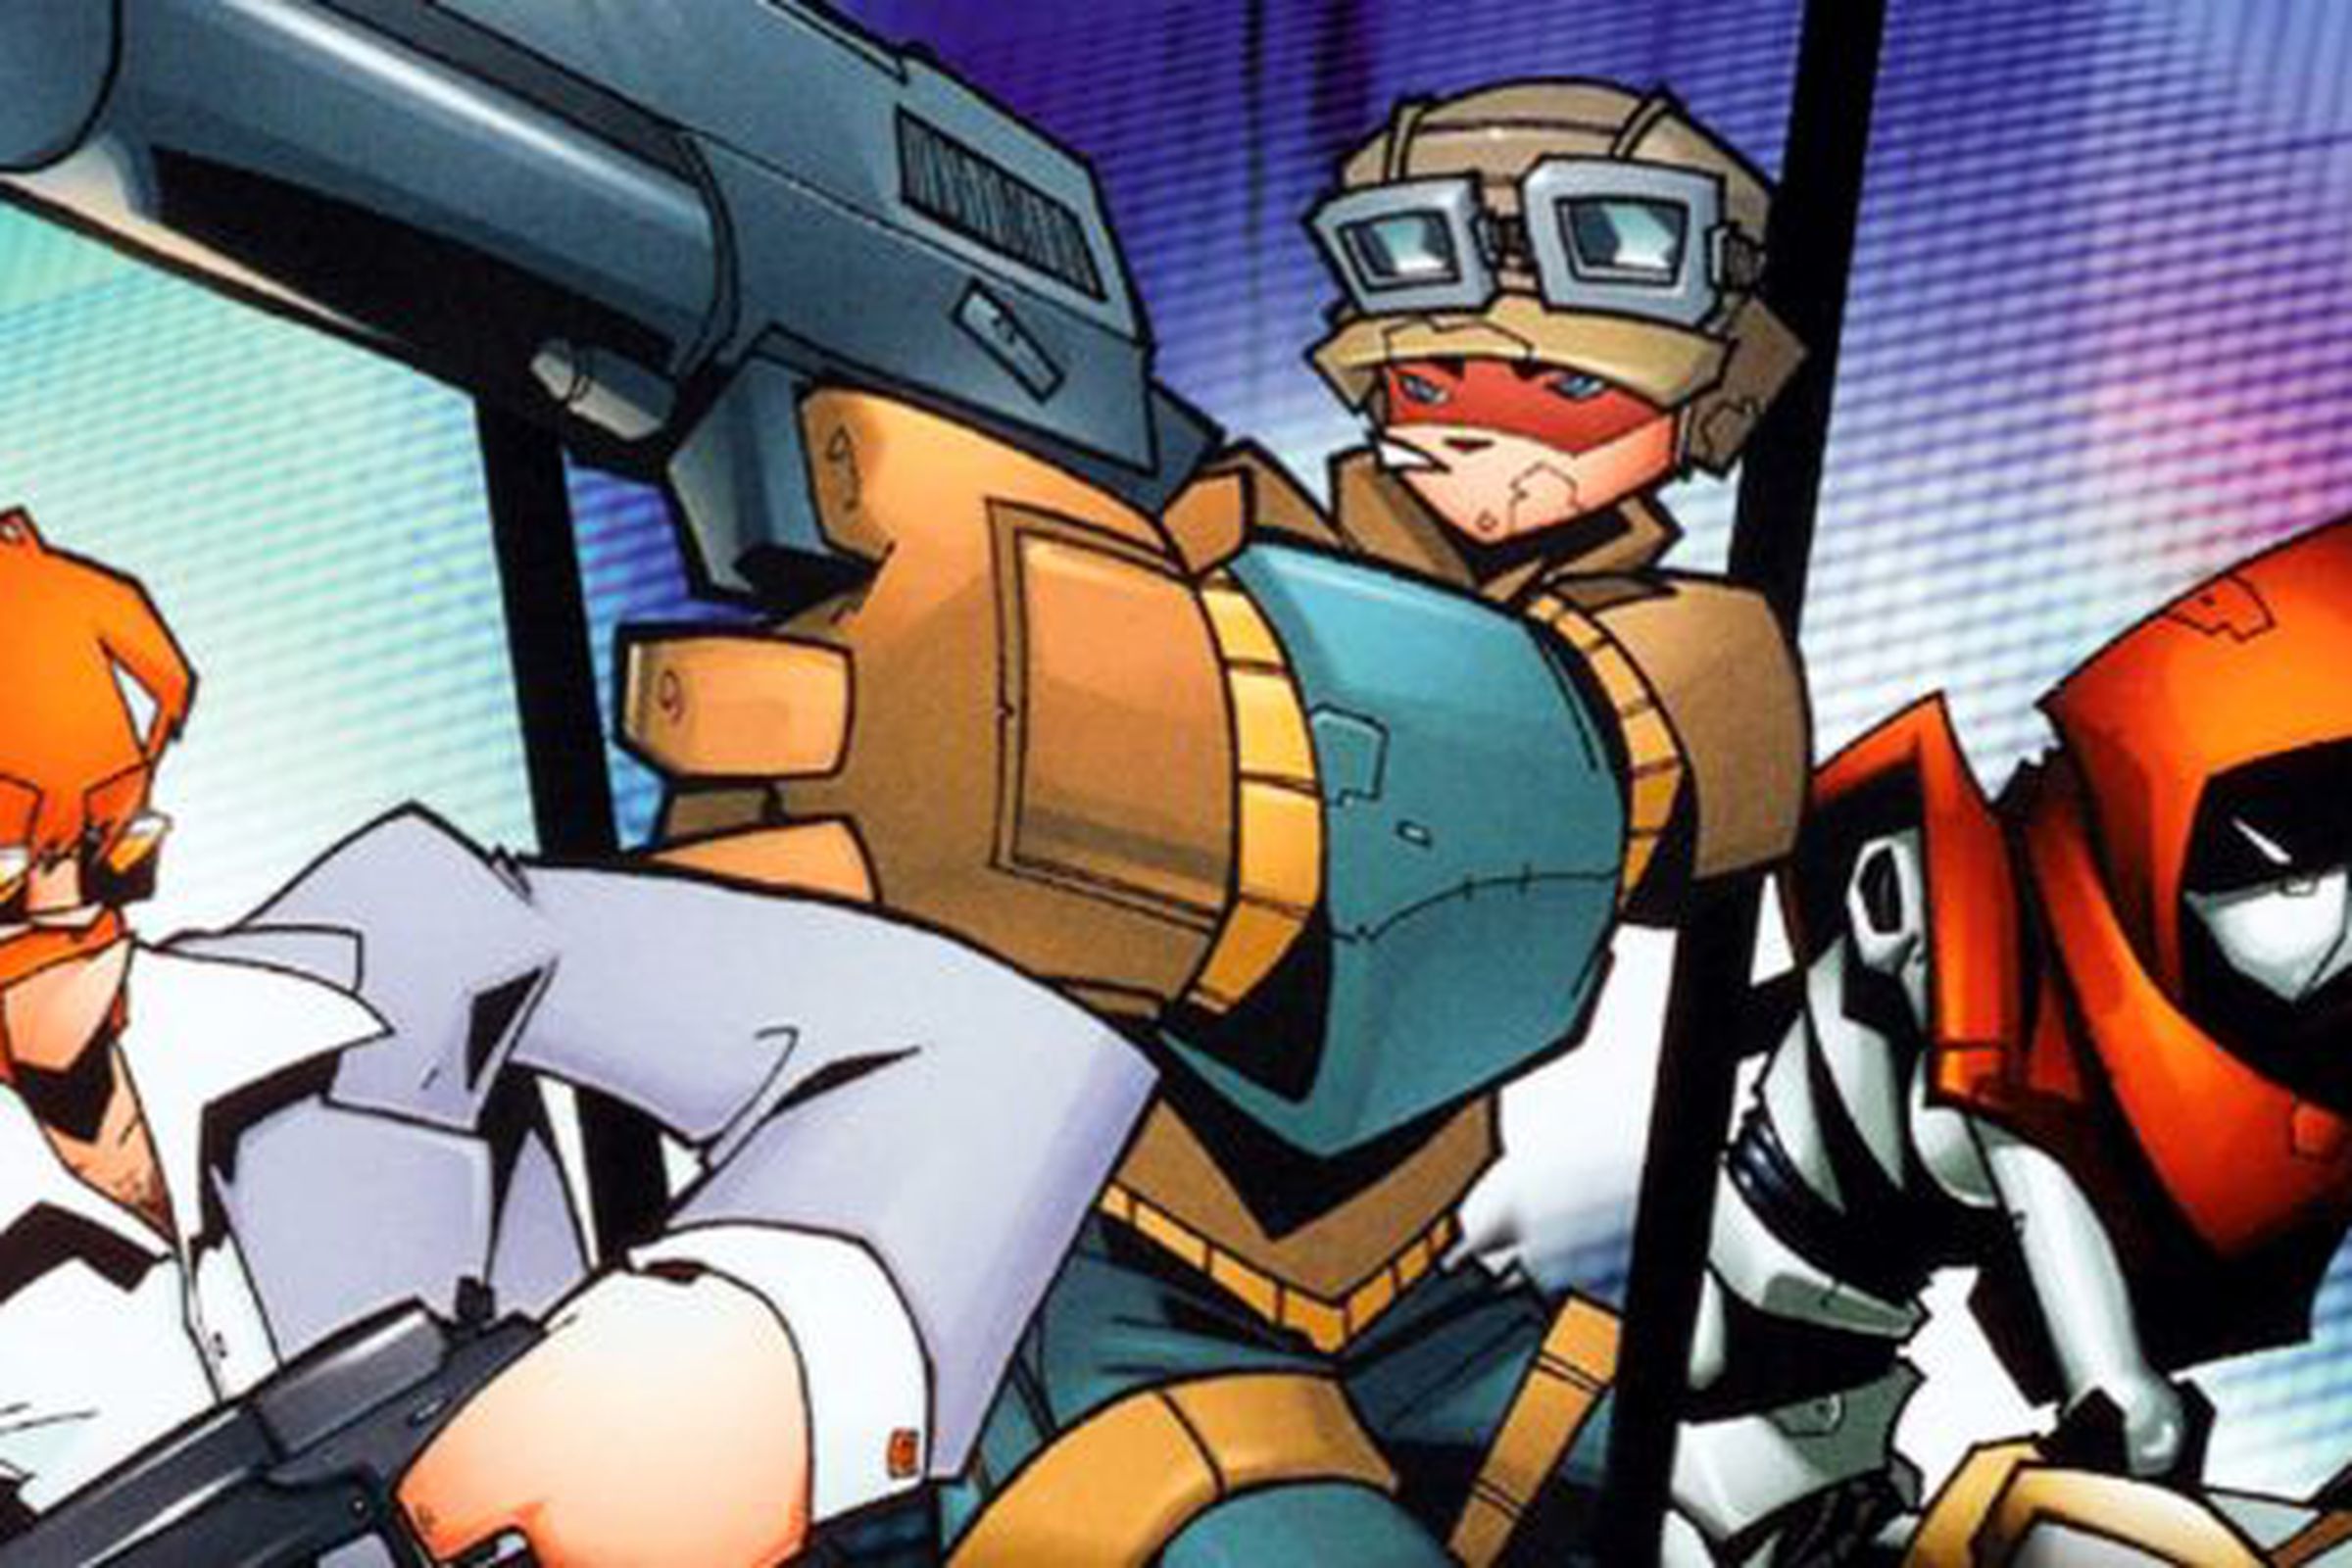 Cover art from the original TimeSplitters 2 released in 2002.